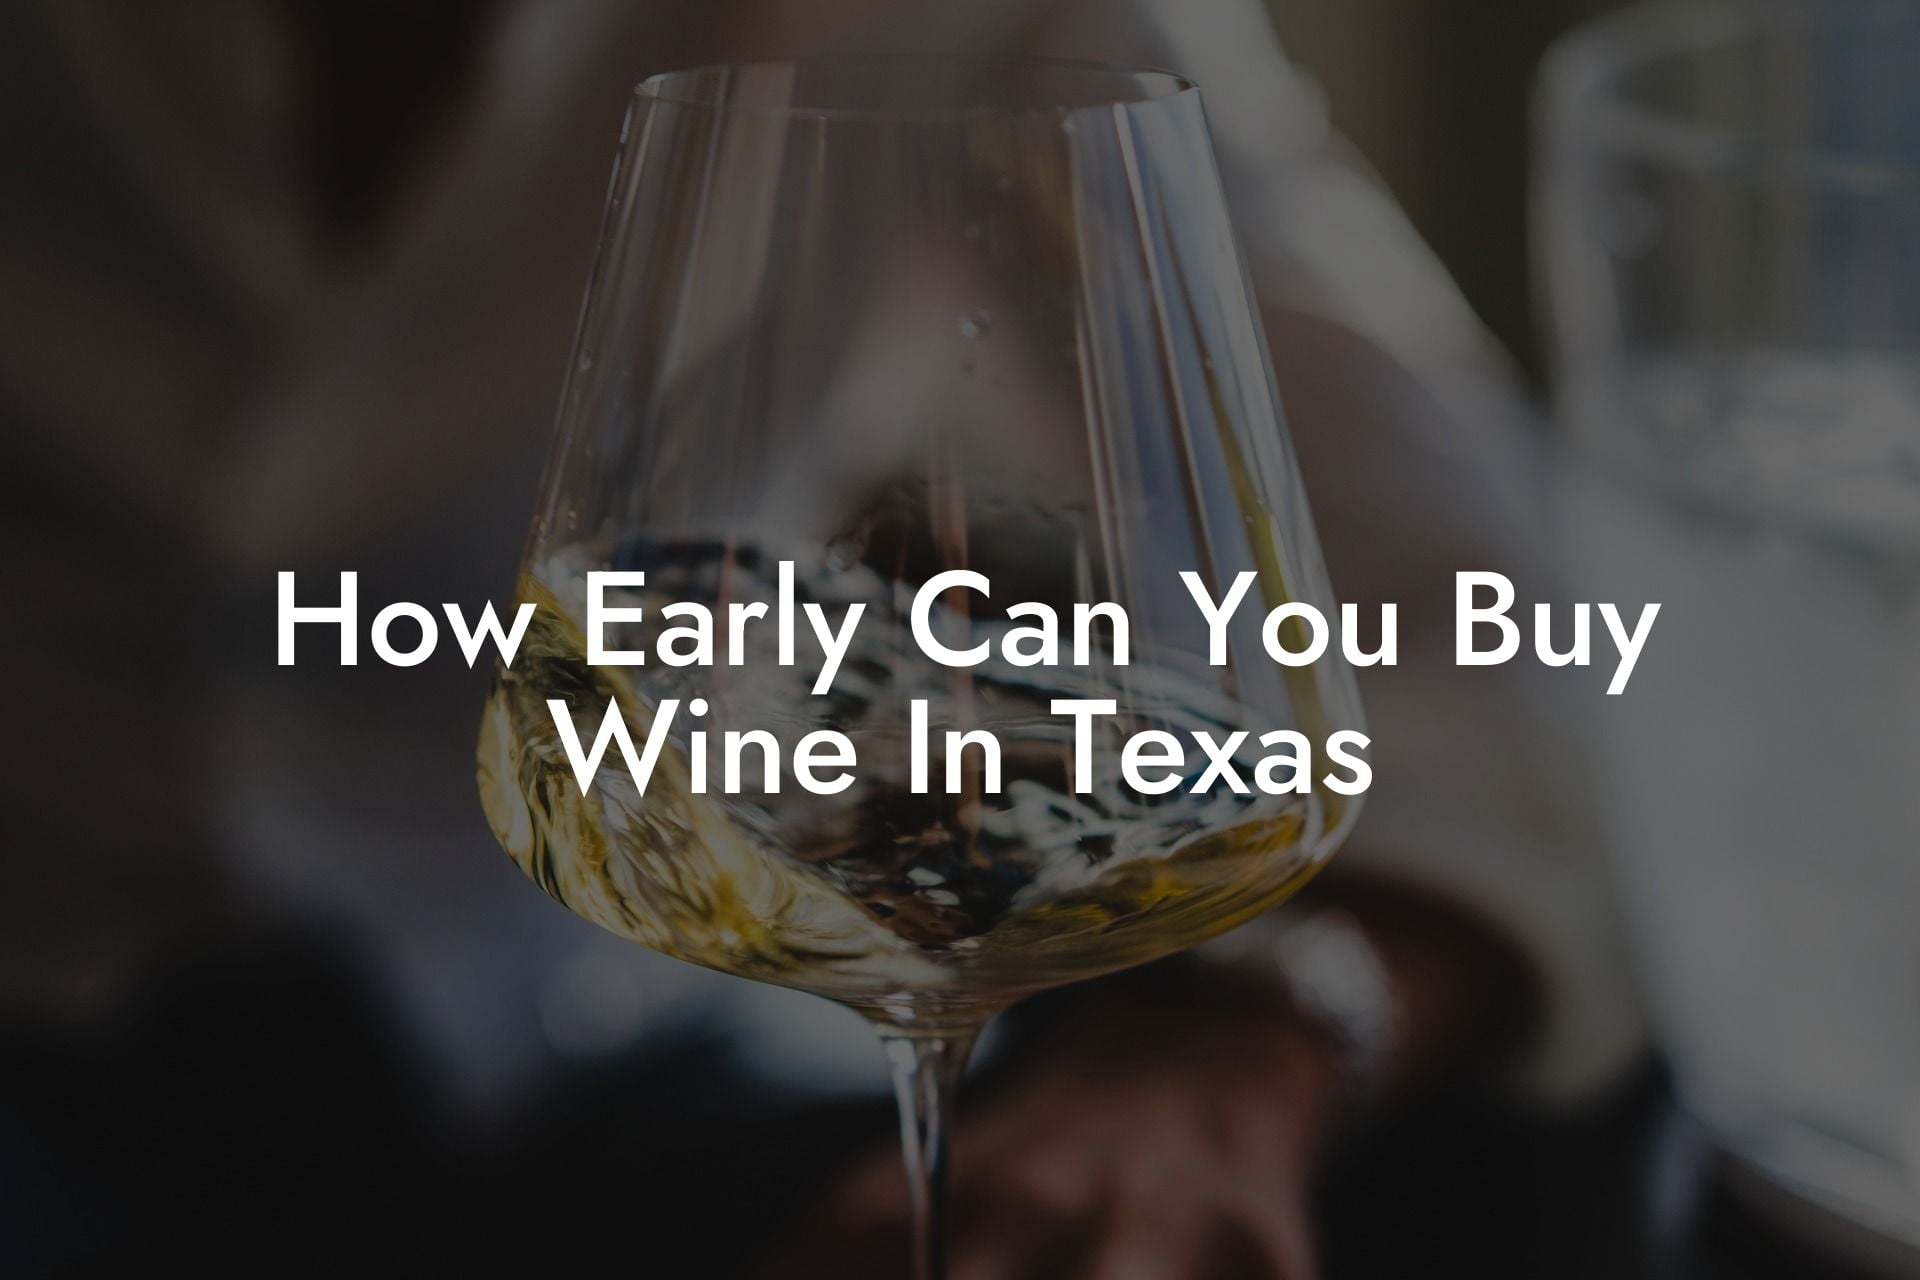 How Early Can You Buy Wine In Texas